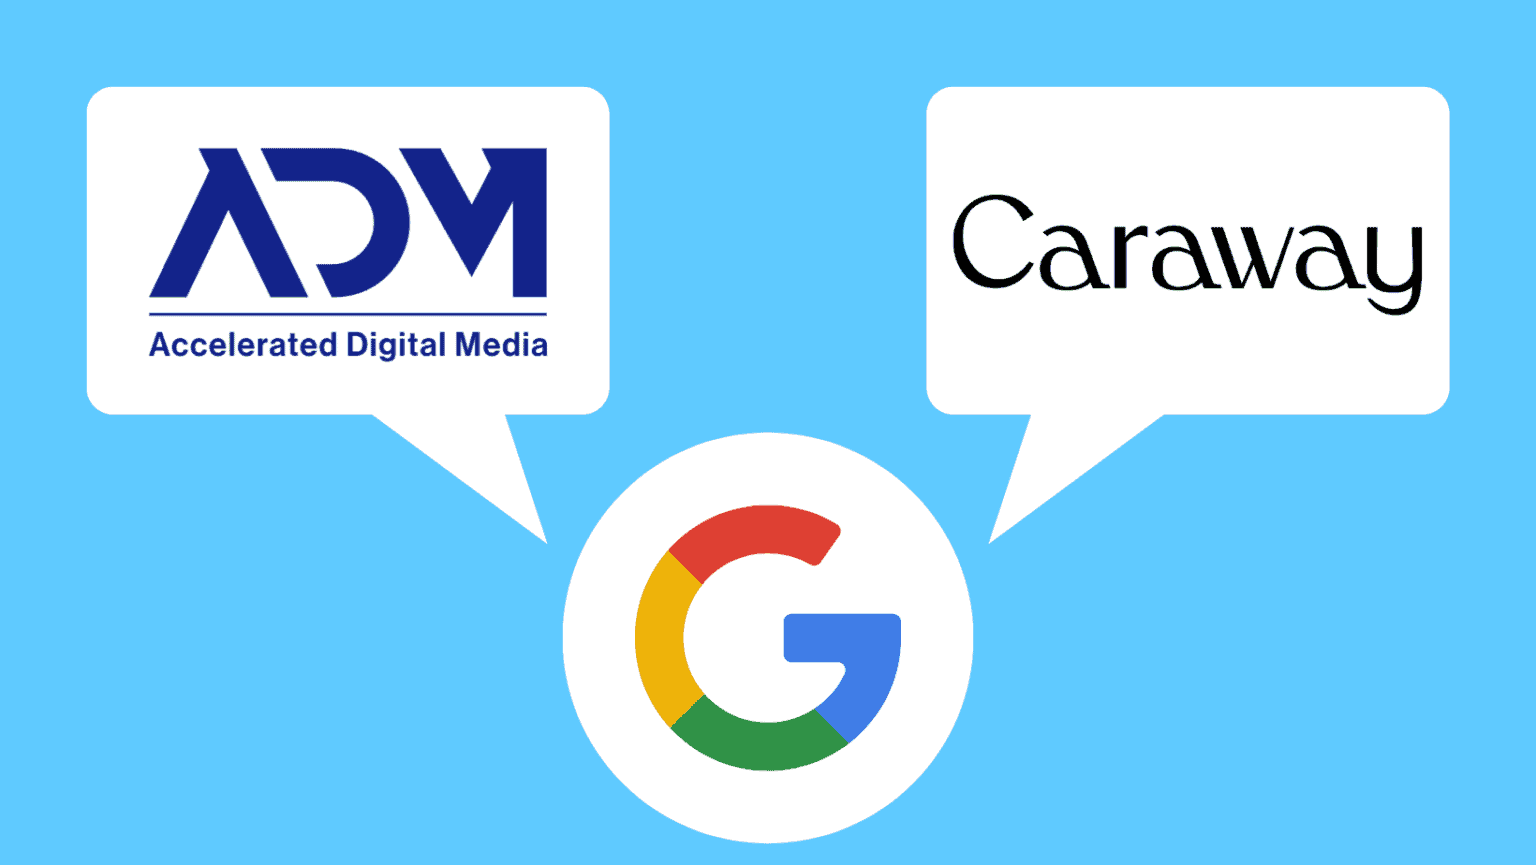 ADM and Caraway Earn Shoutout on Google Earnings Call Accelerated